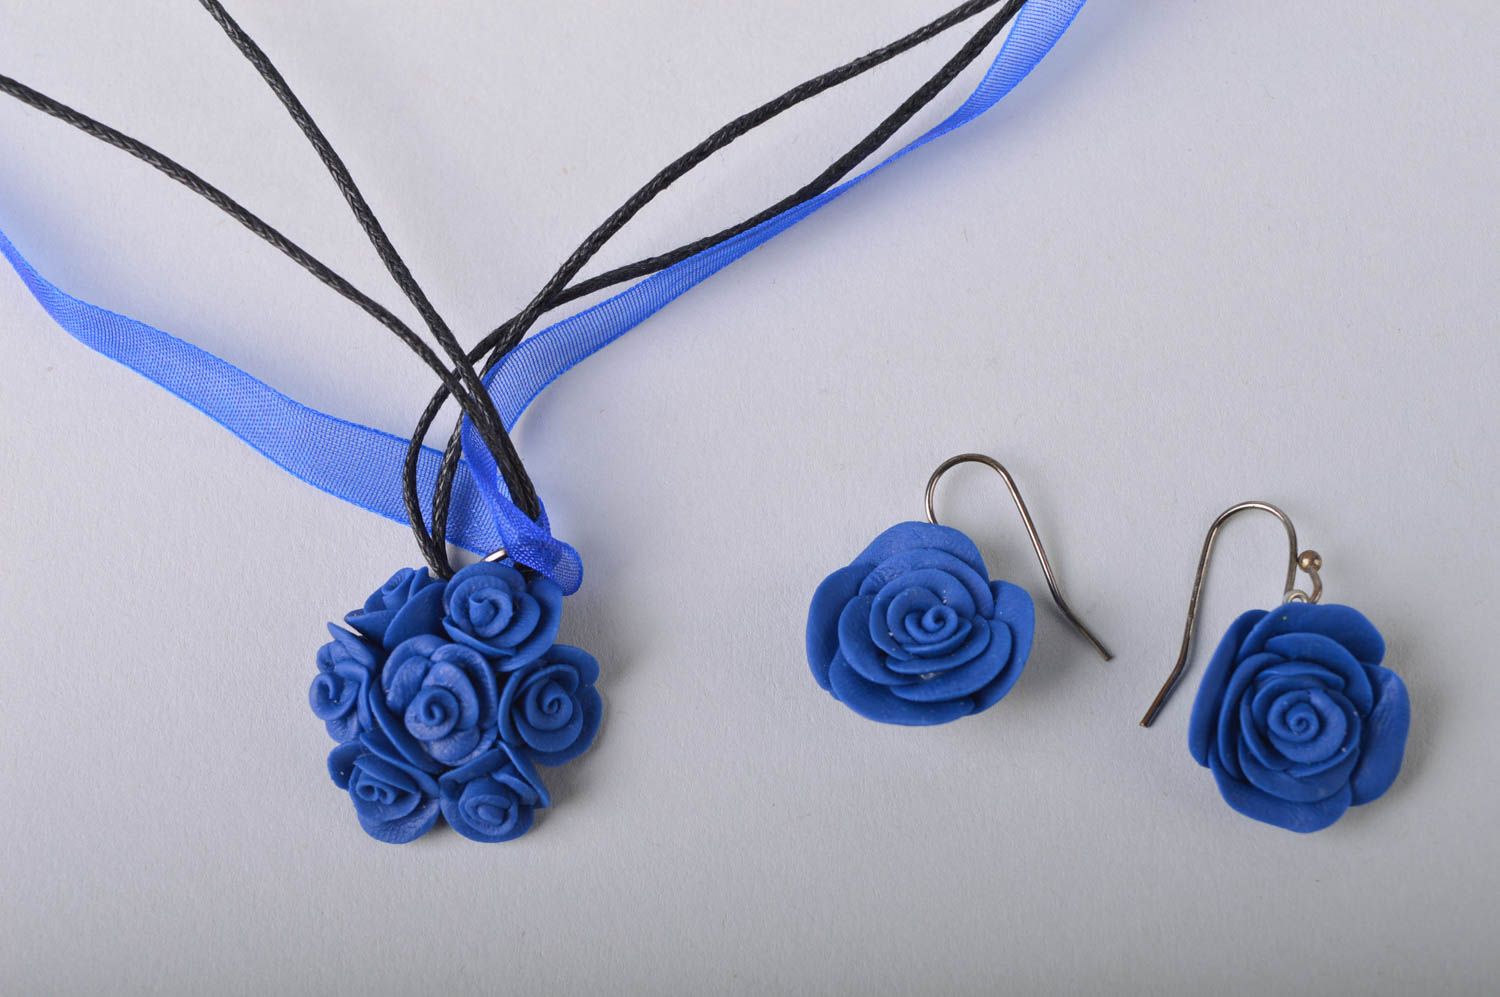 Handmade jewelry set made of cold porcelain earrings and pendant with flowers photo 3